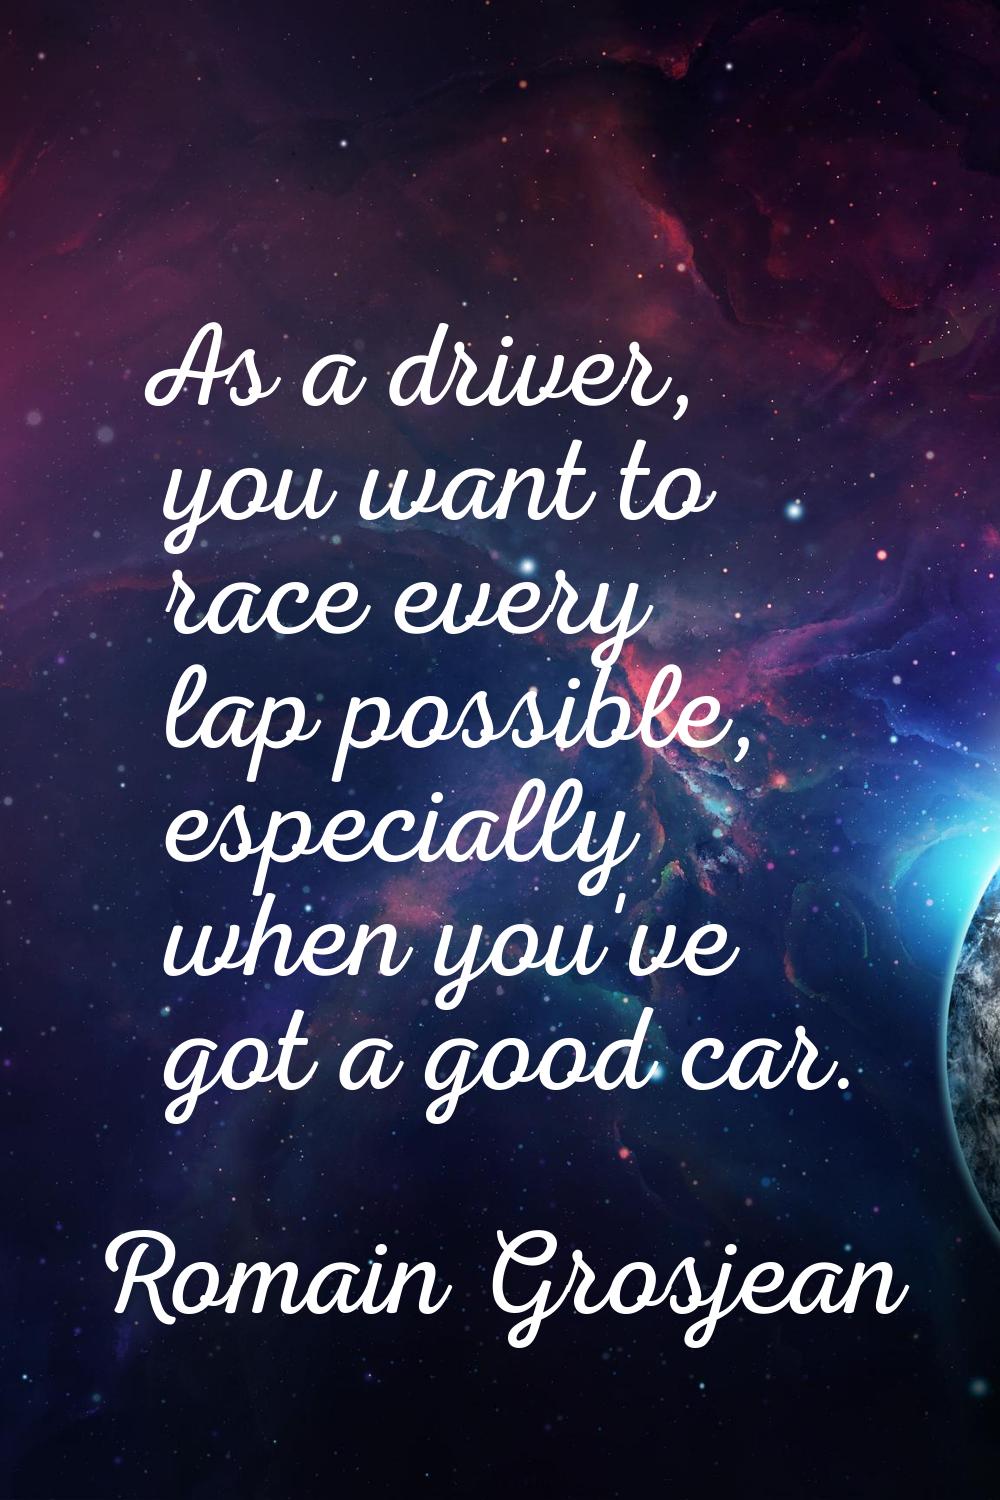 As a driver, you want to race every lap possible, especially when you've got a good car.